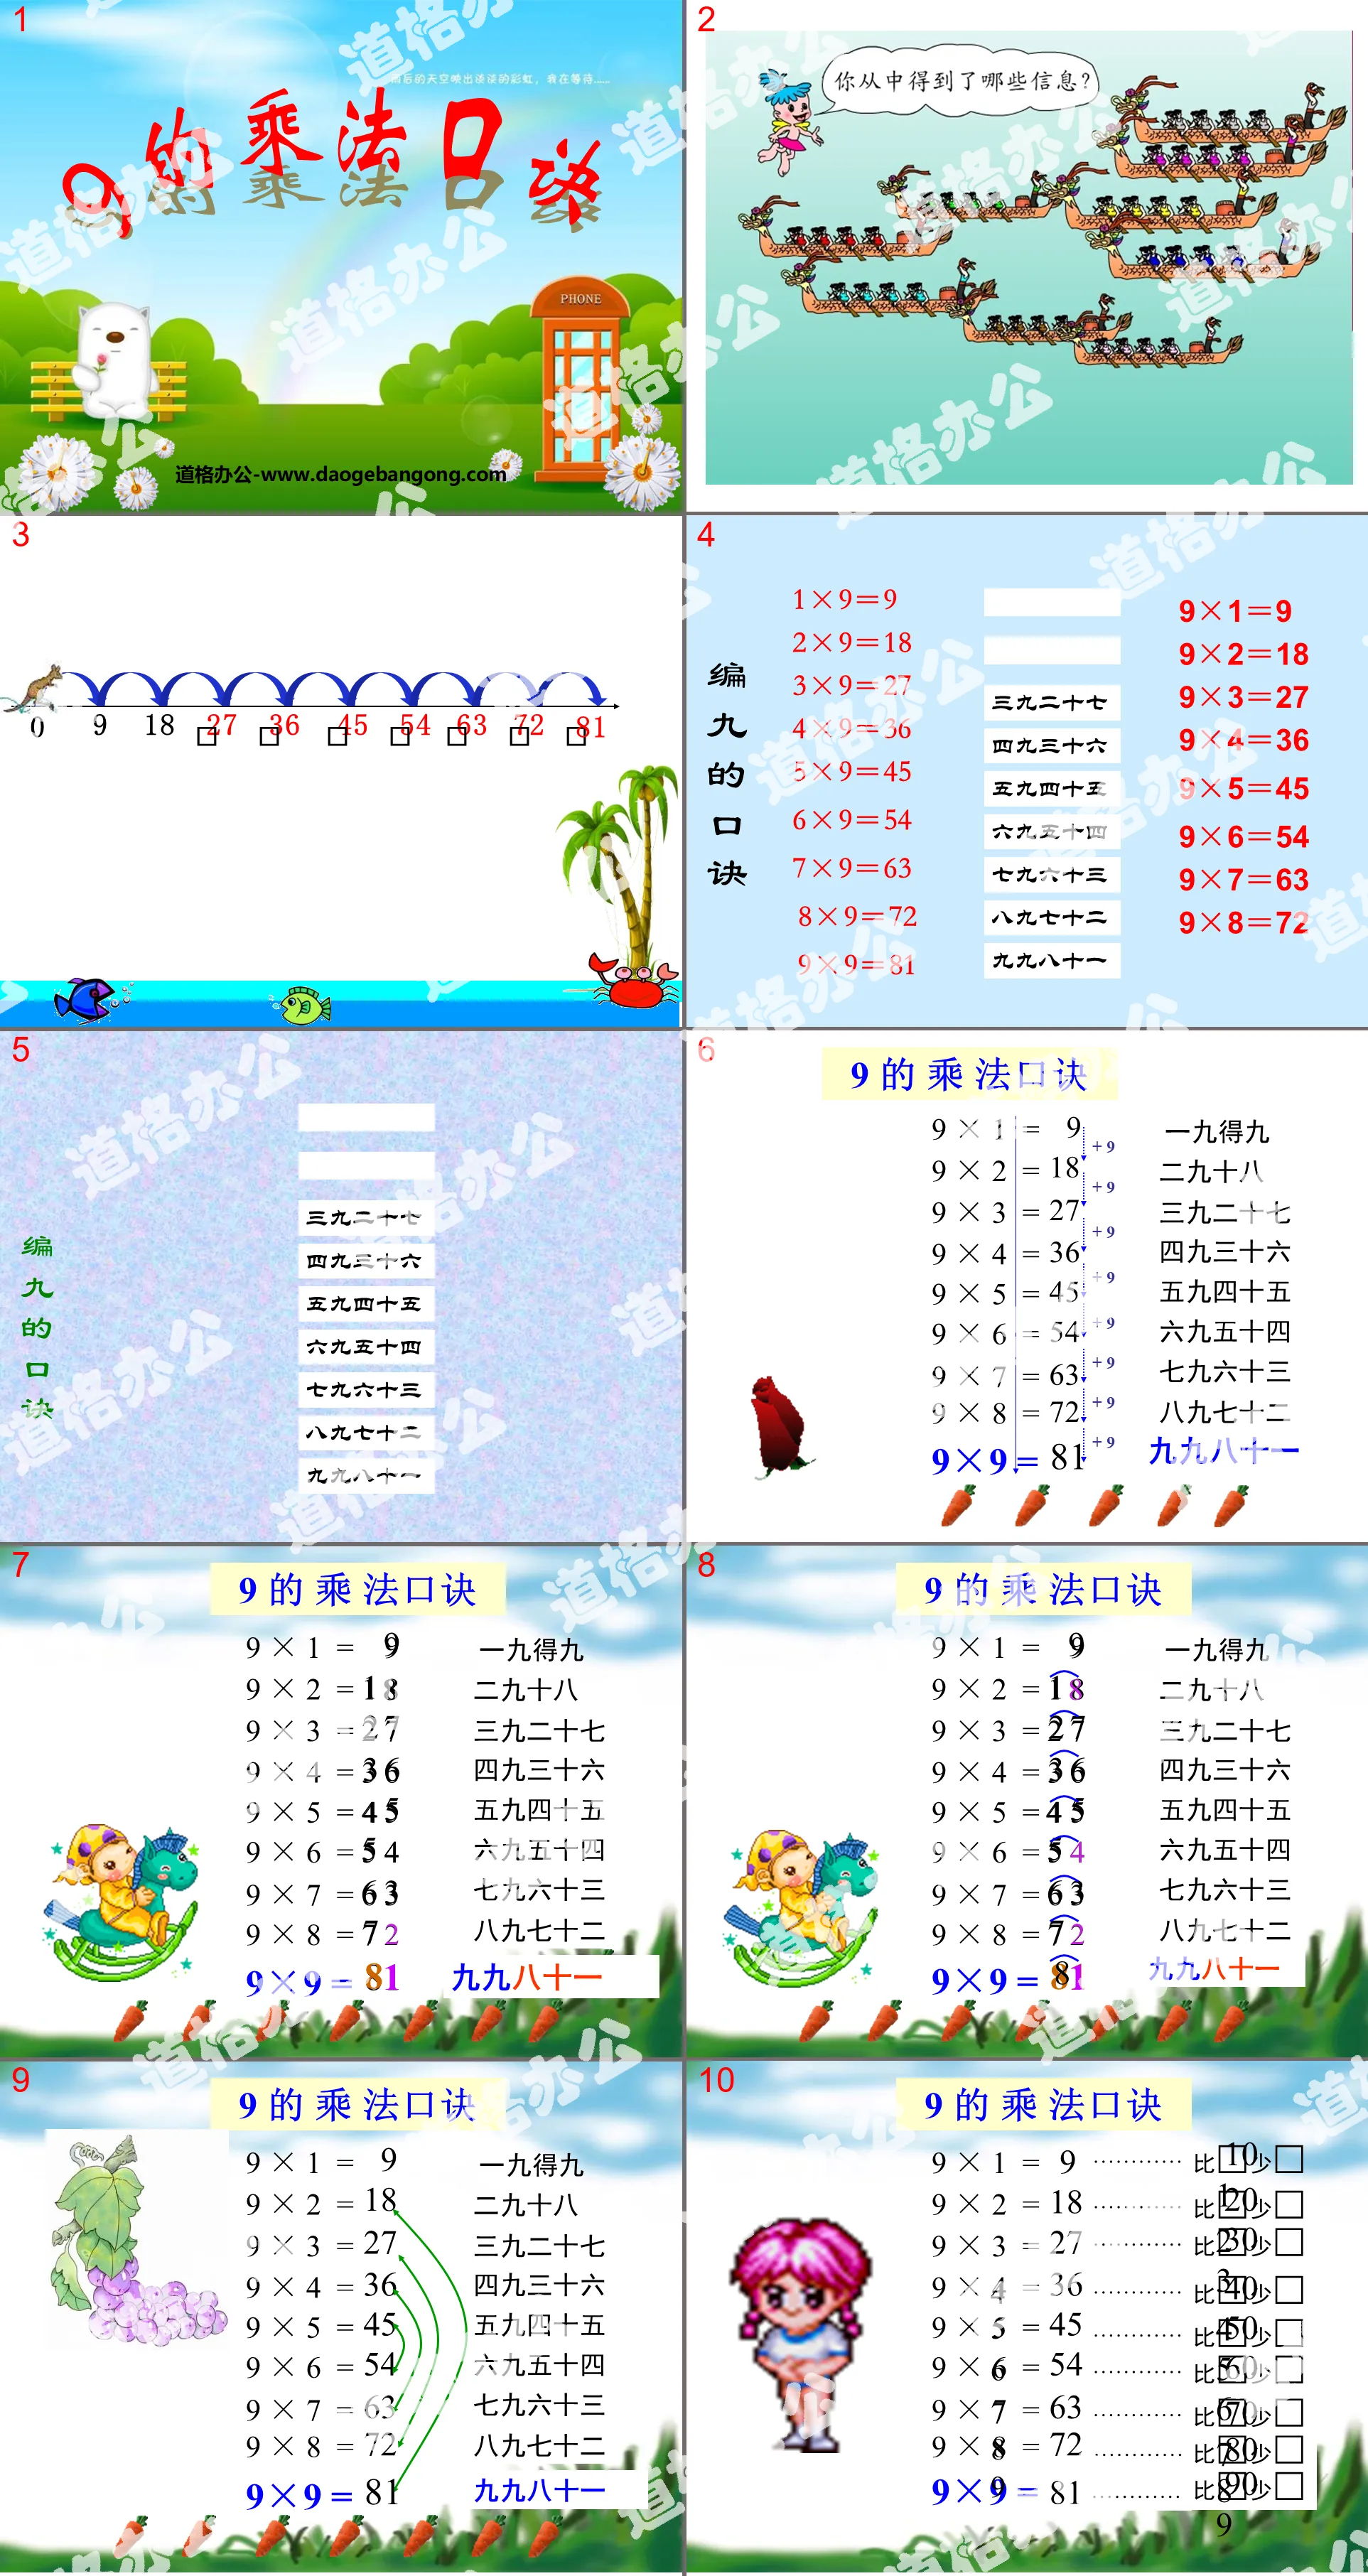 "Multiplication Table of 9" PPT Courseware for Multiplication and Division in Tables